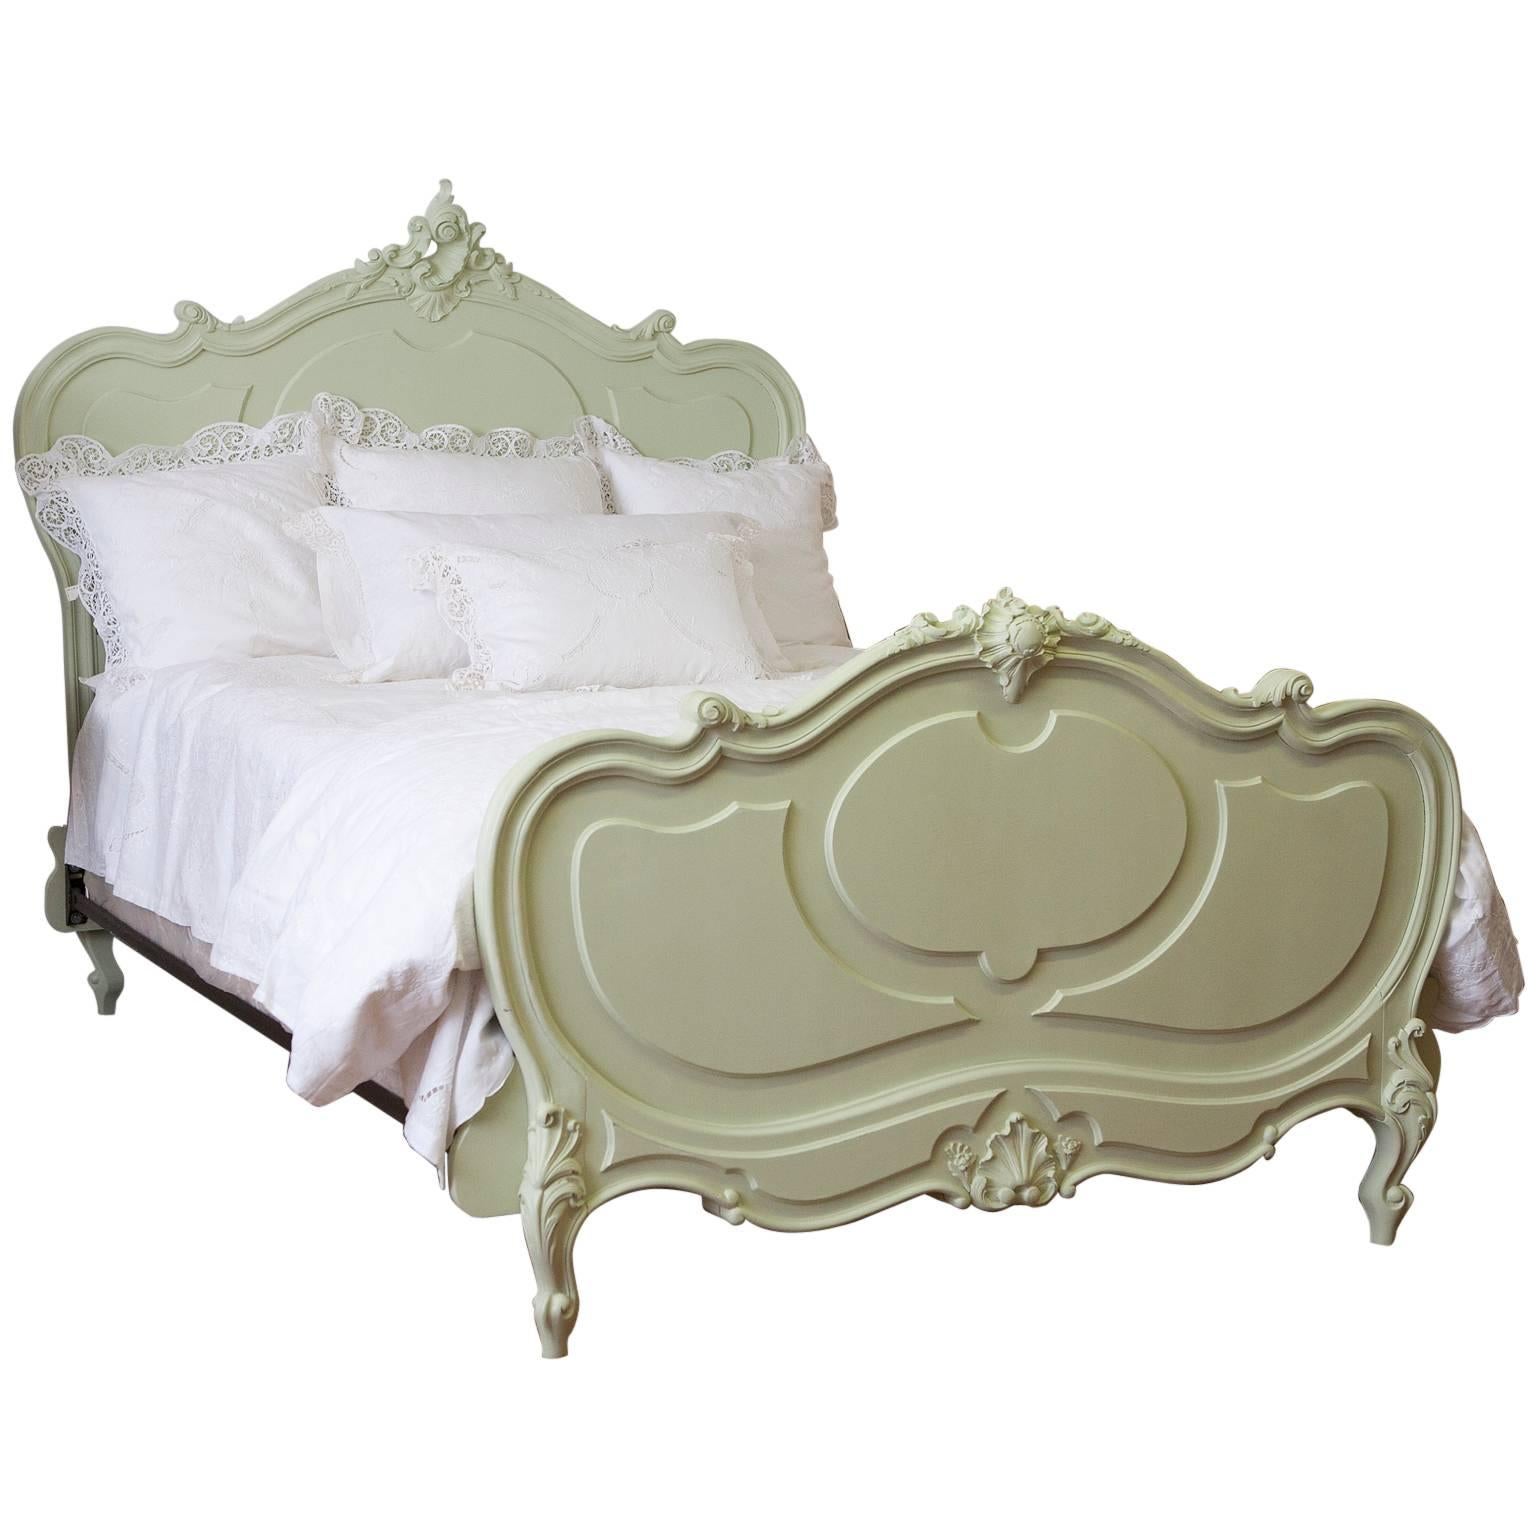 Antique French Louis XV Style Queen Bed from the Belle Époque Period